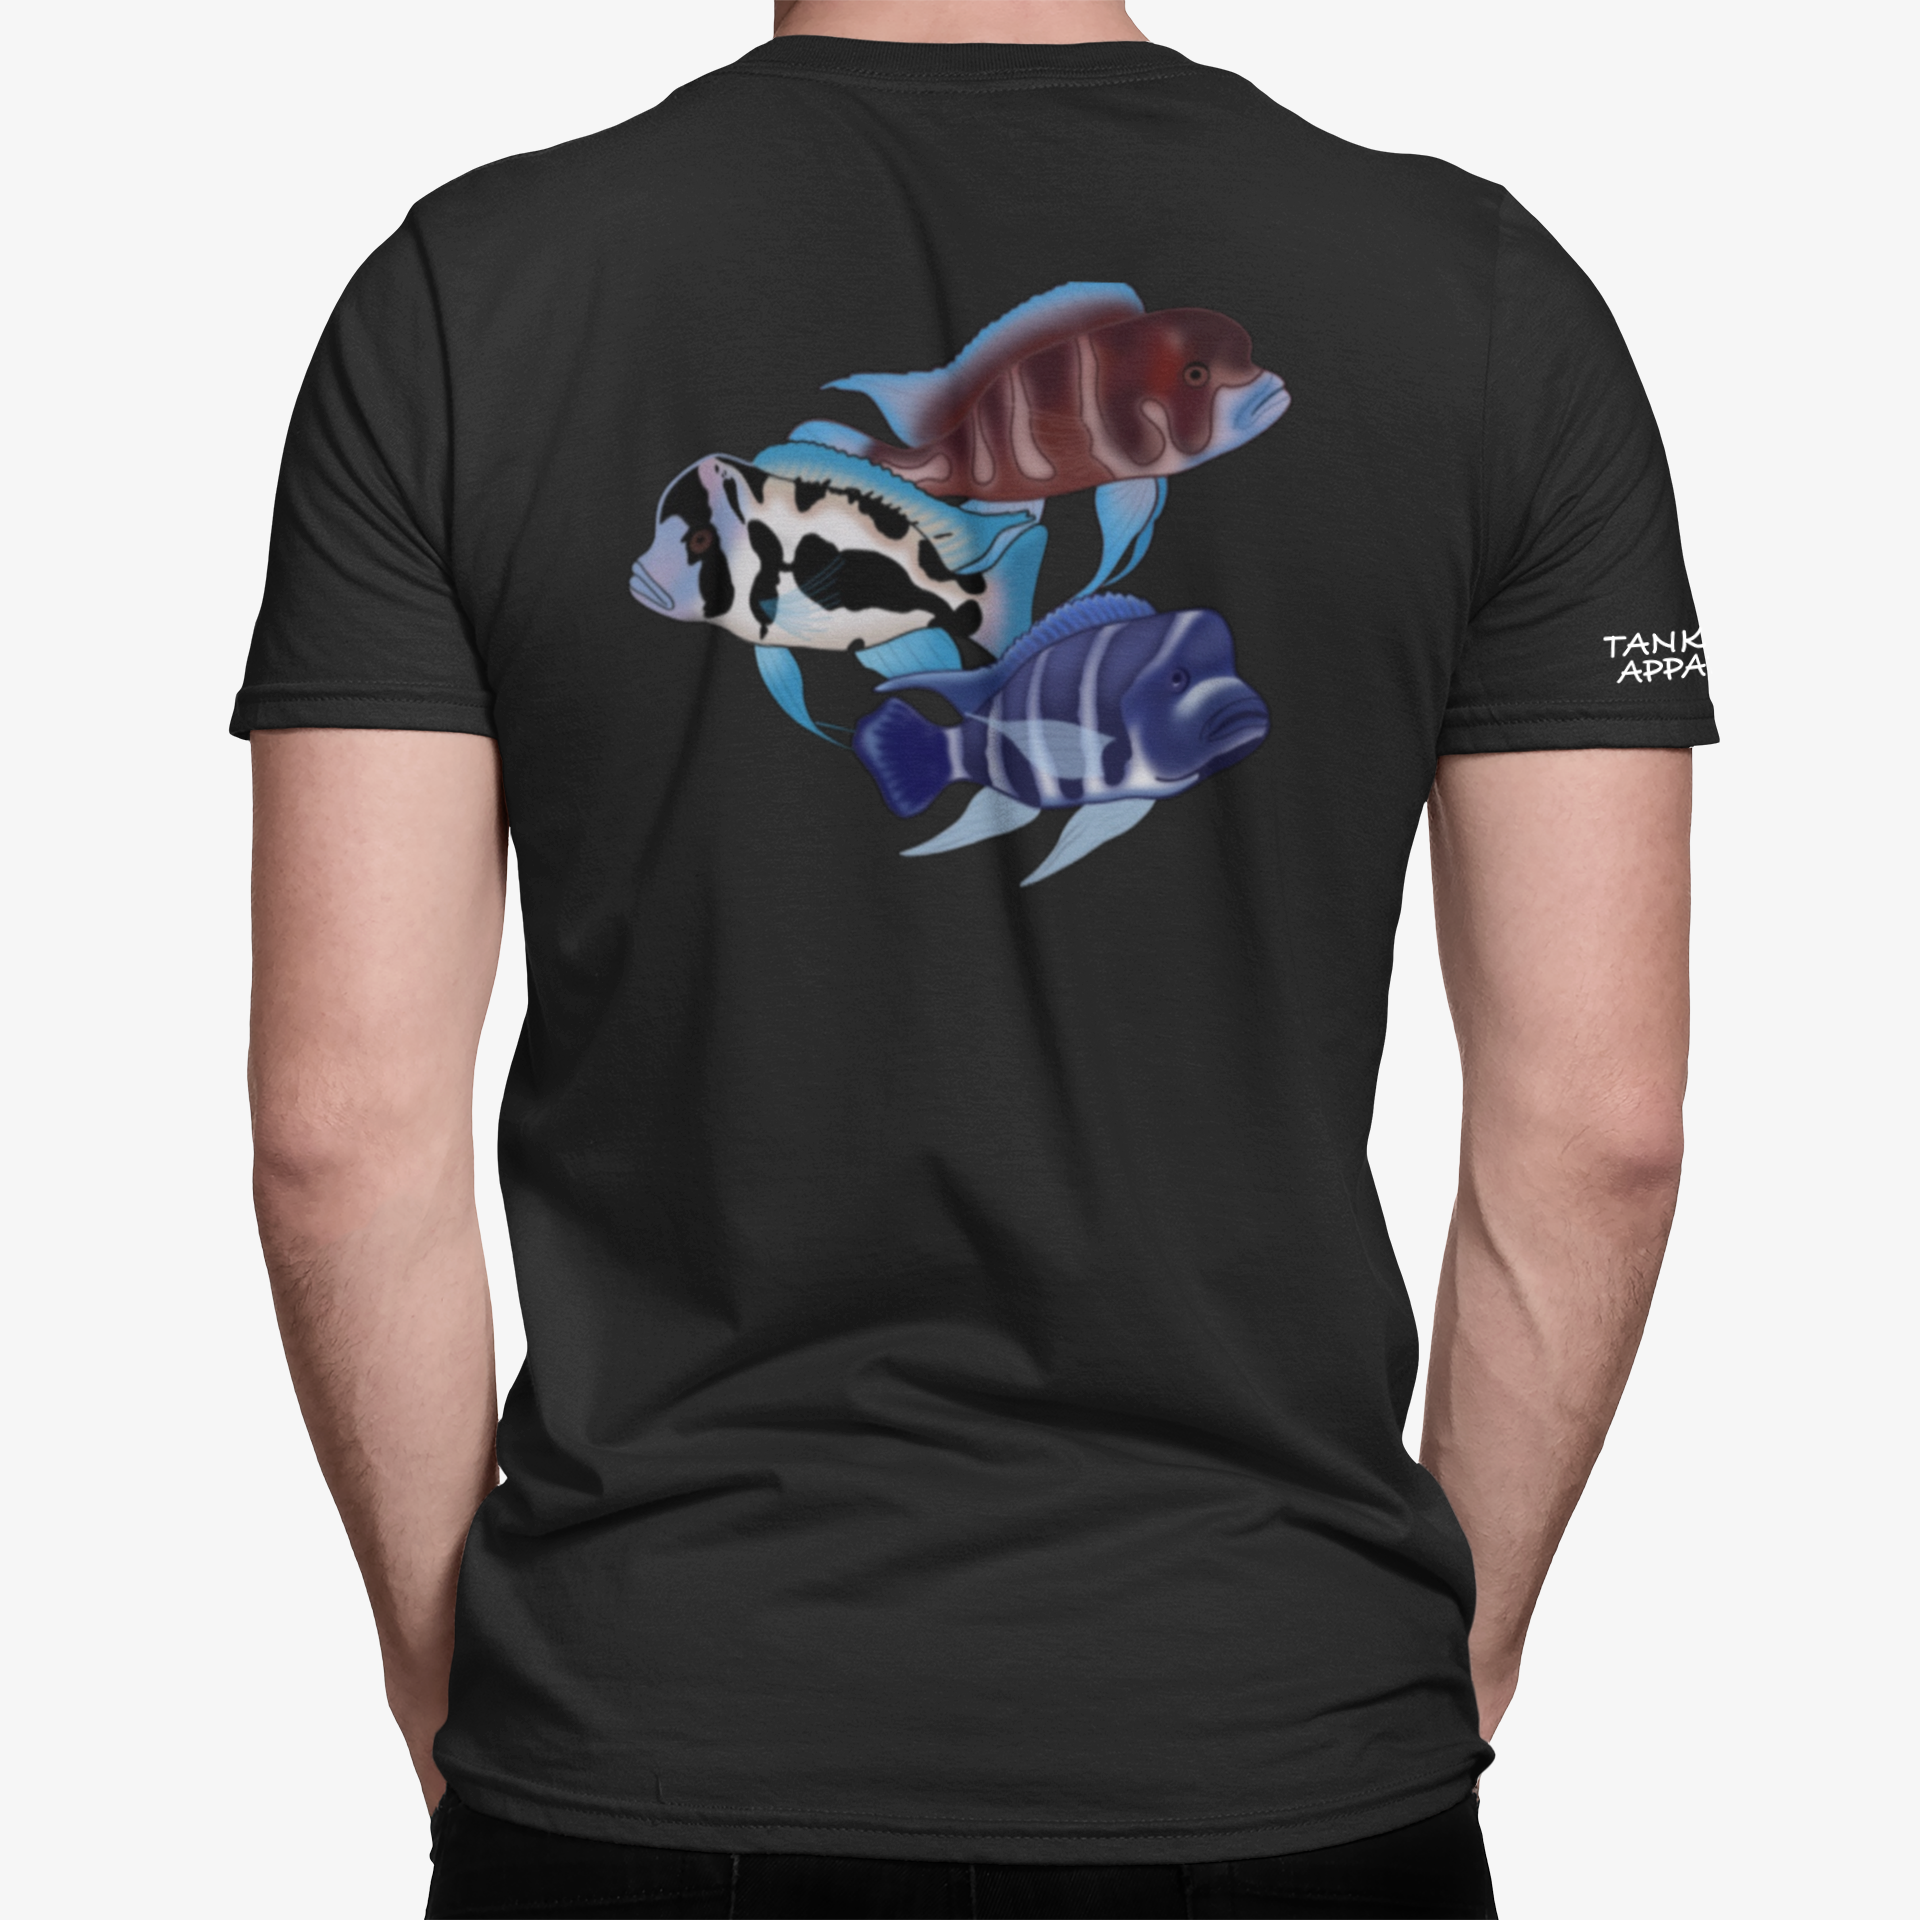 The Tank Life Apparel frontosa cichlid design on an athletic dri fit performance shirt. Three fish Black widow, red frontosa, blue zaire. Blue fish with dark stripes.